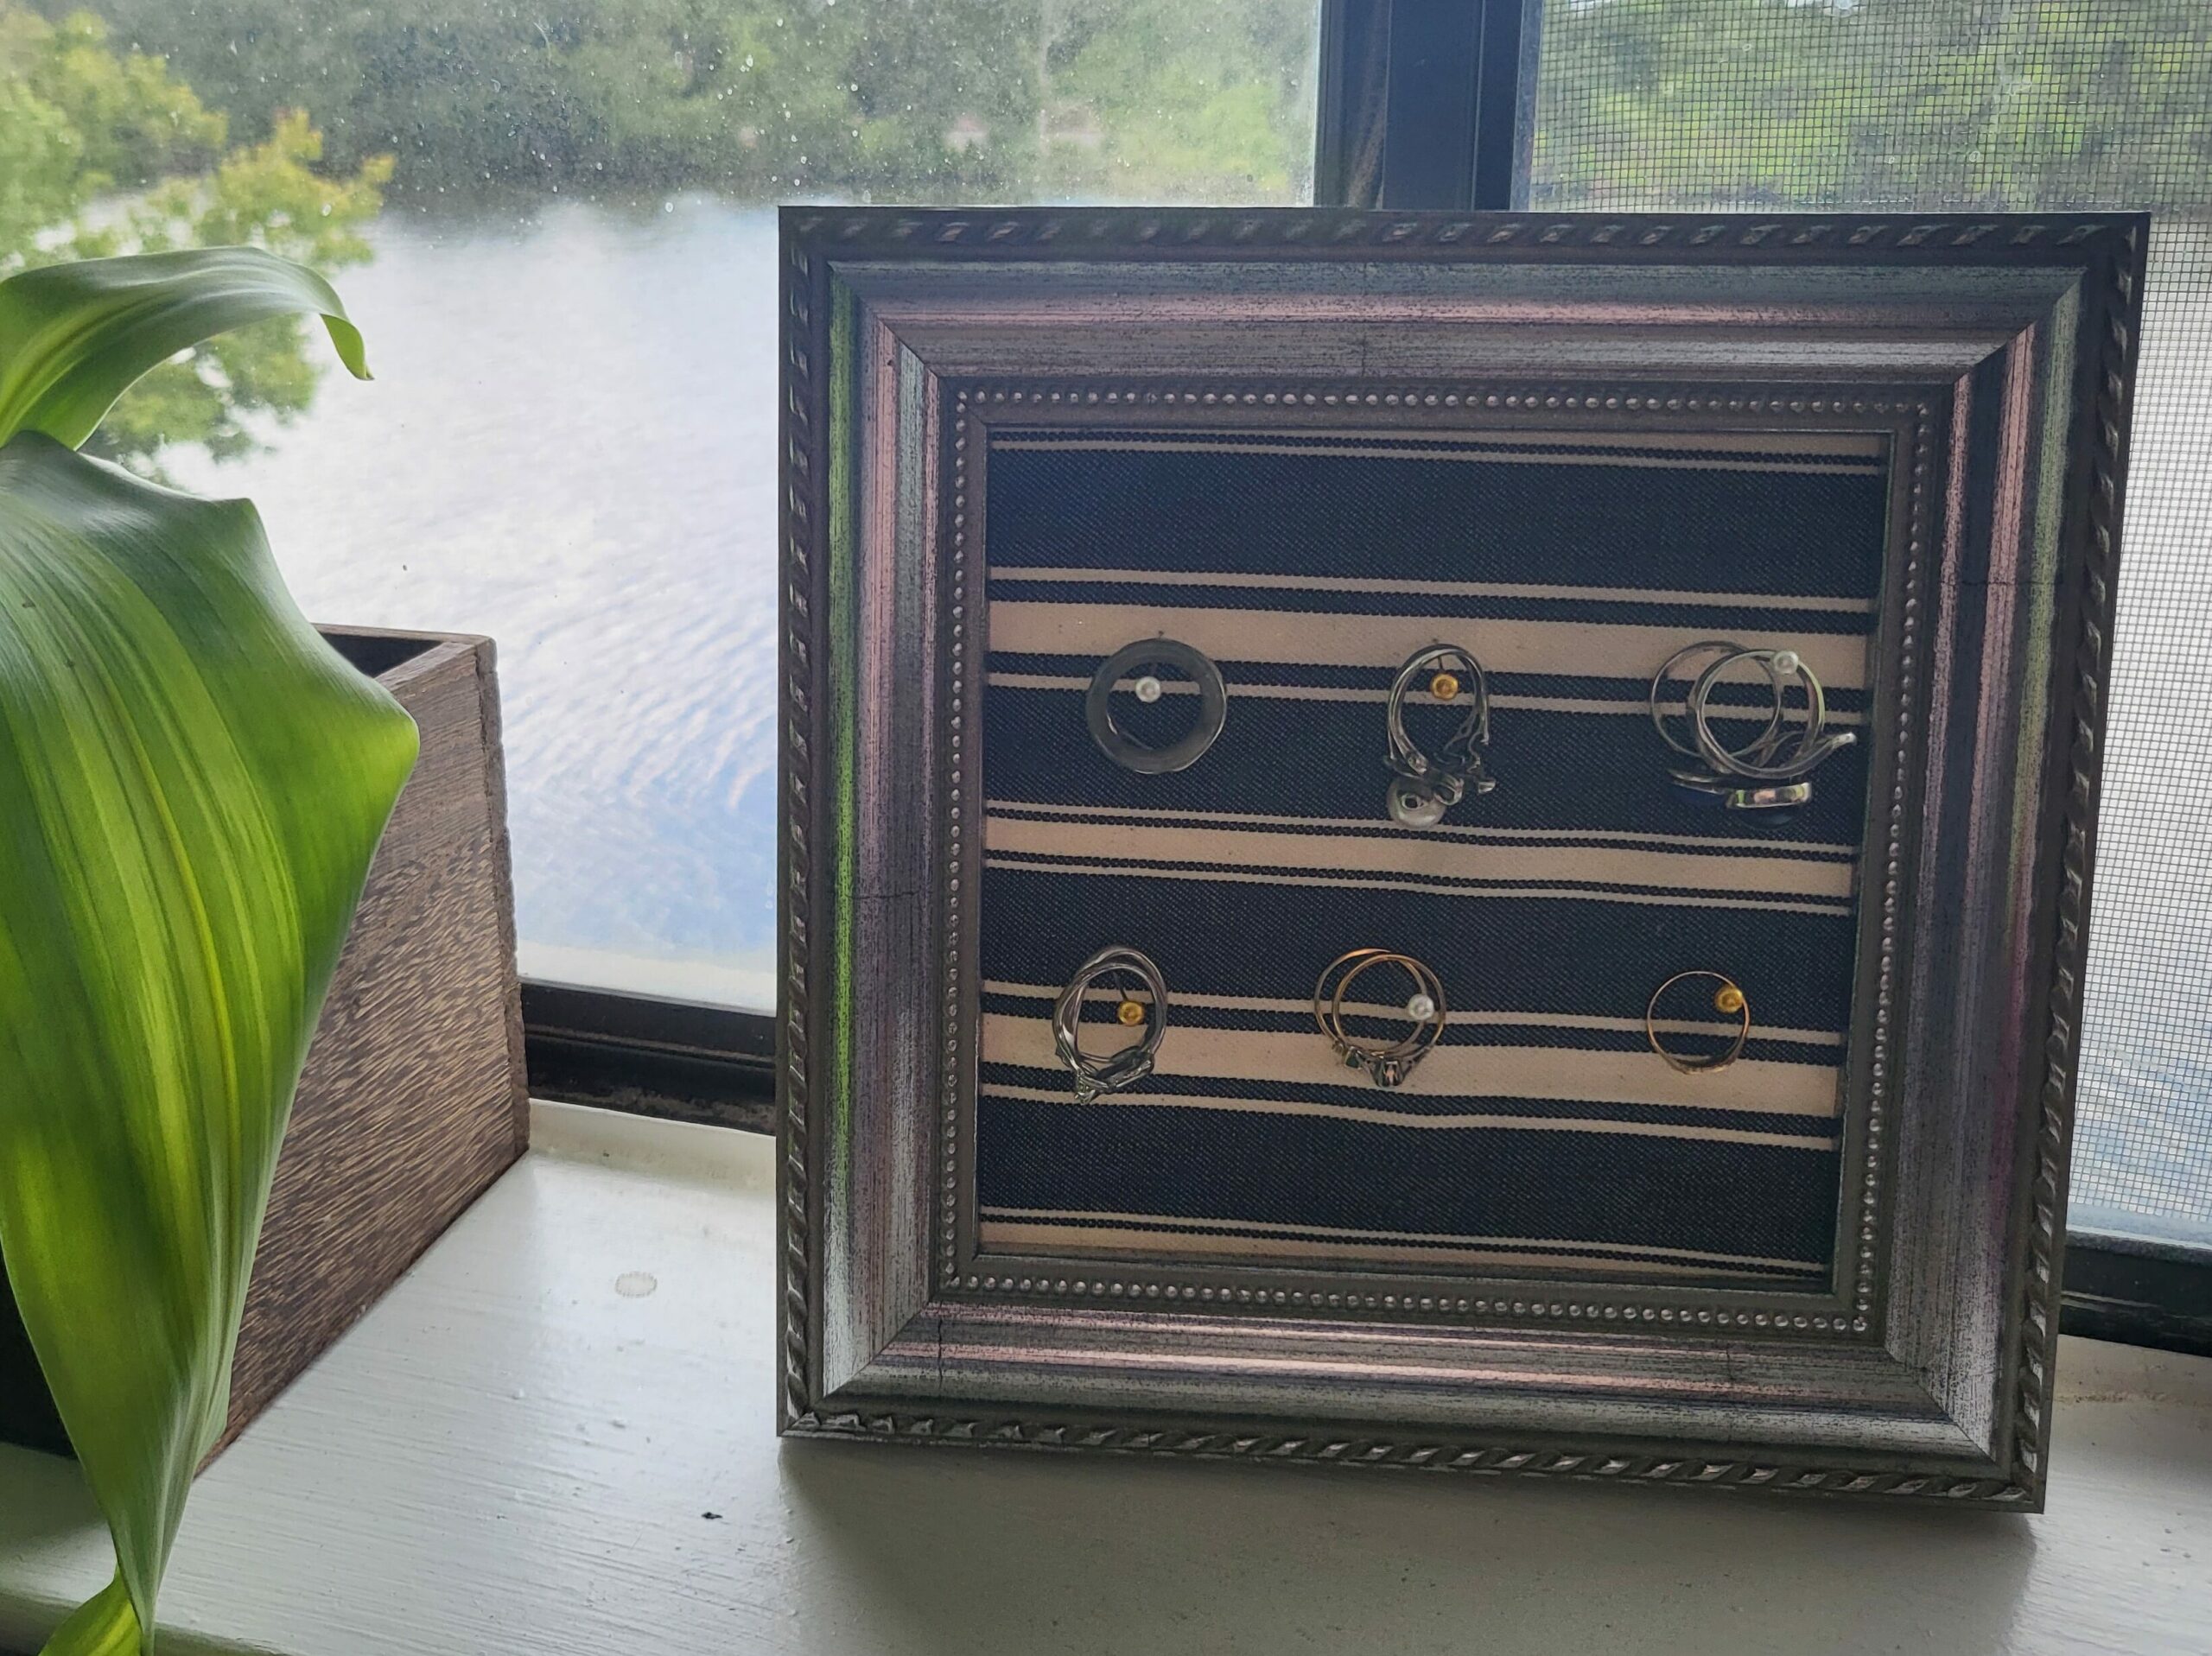 Picture Frame Jewelry Display: A Smaller Frame is perfect for Rings, Earrings, and Brooches - Customizable by positioning and repositioning the holding pins as you see fit. 